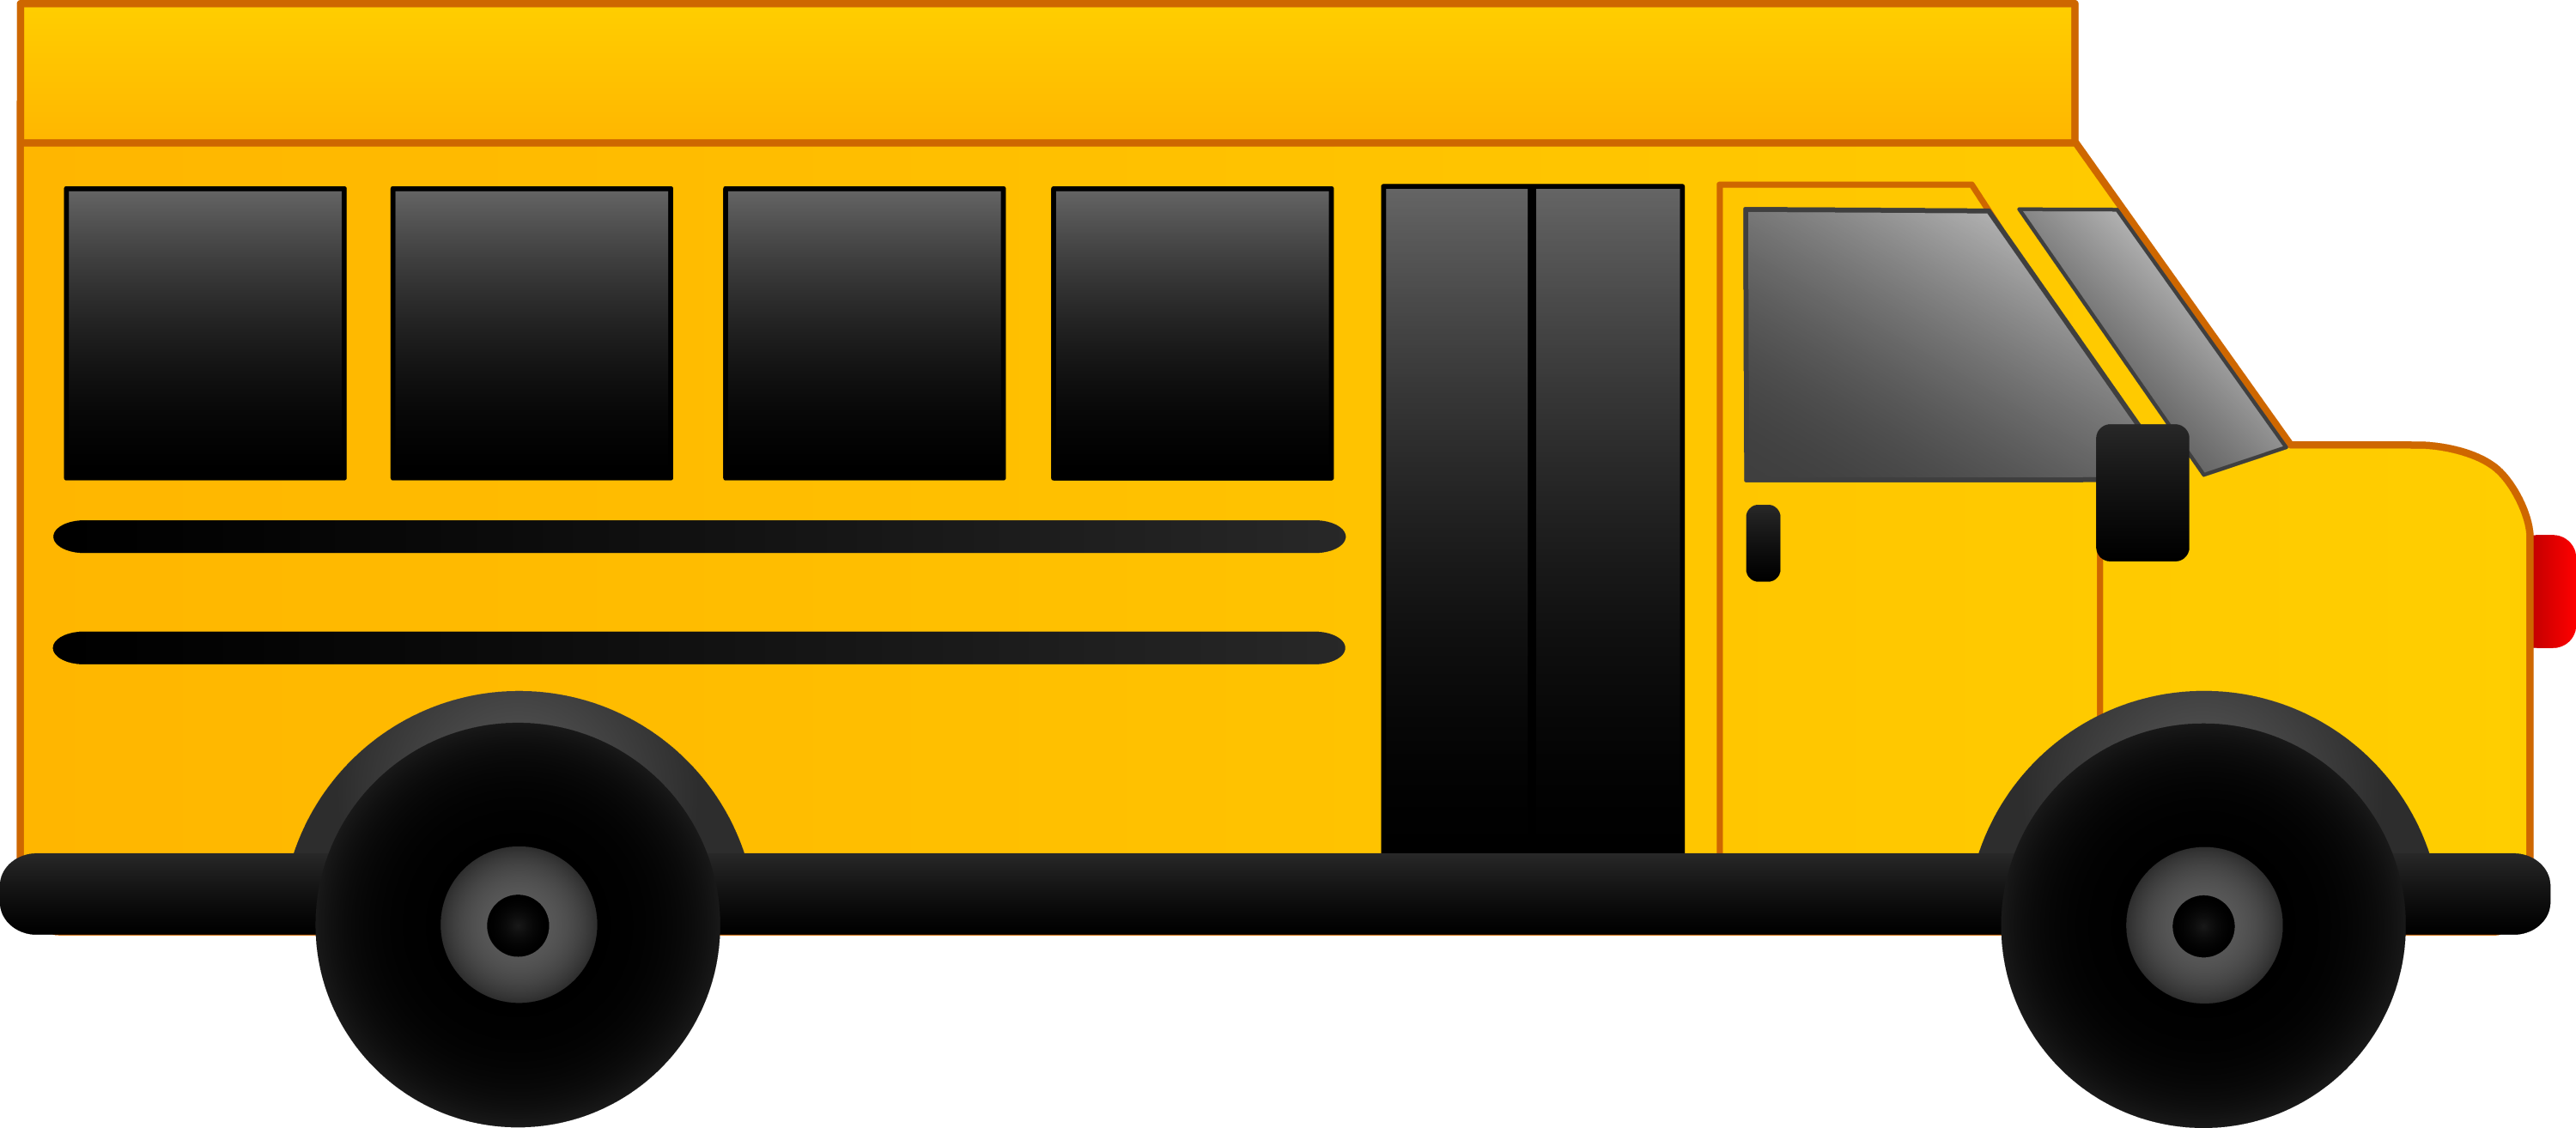 free clipart images school bus - photo #39